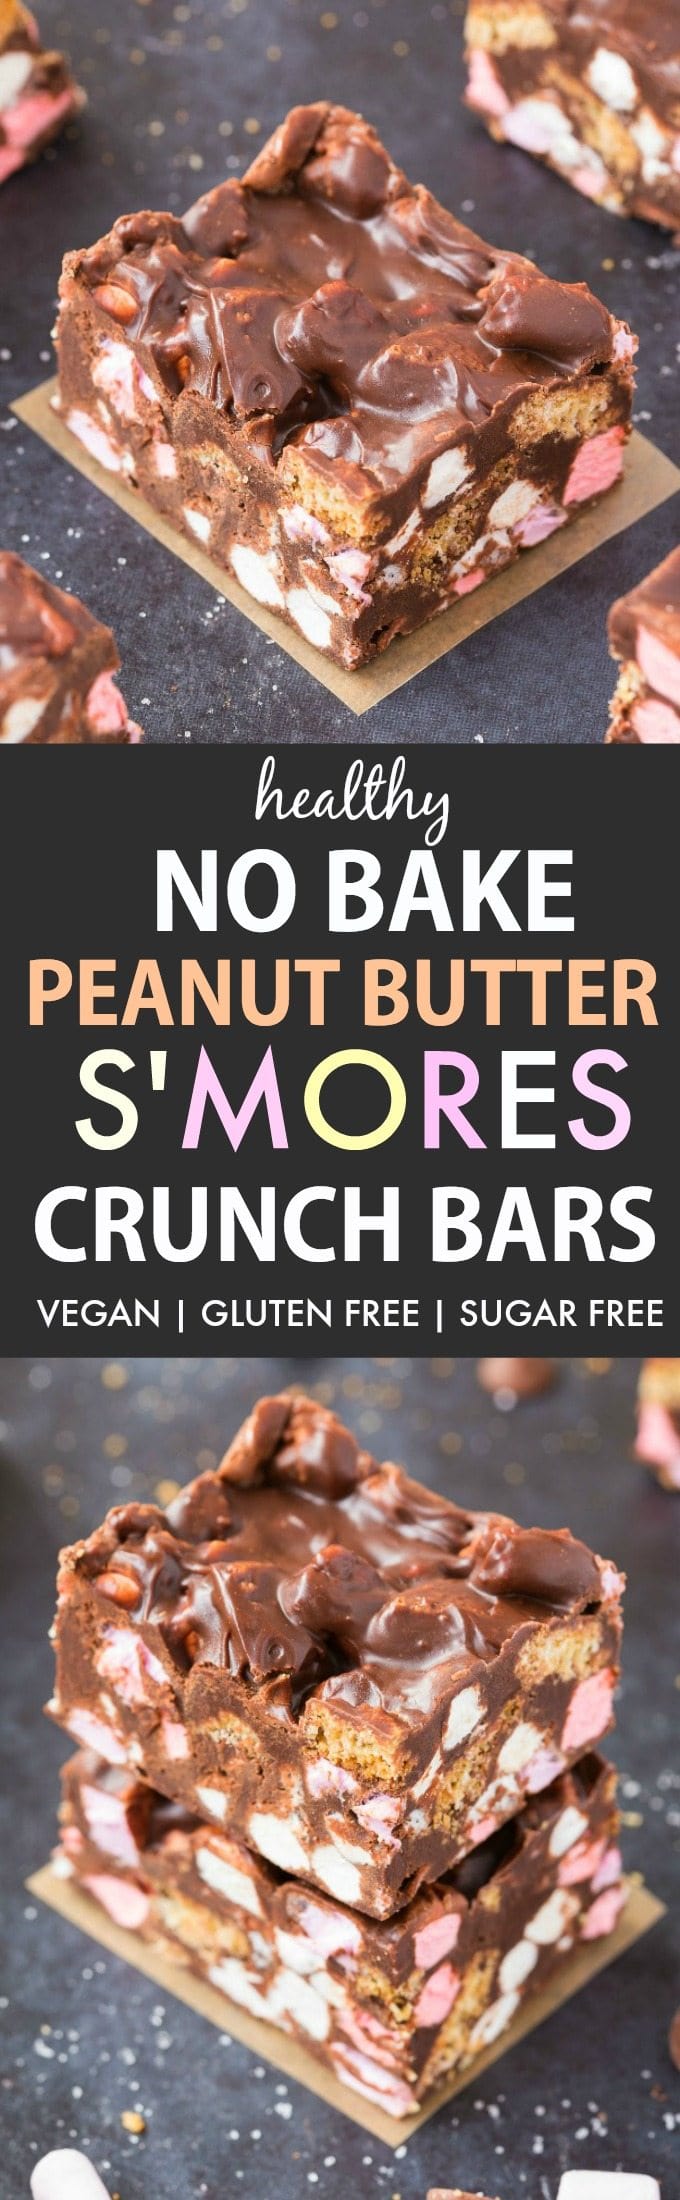 No Bake Peanut Butter S'mores Crunch Bars (V, GF, DF)- Easy, fuss-free and delicious, this healthy candy bar copycat combines marshmallows, cookie pieces and peanut butter in one! {vegan, gluten free, sugar free recipe}- thebigmansworld.com